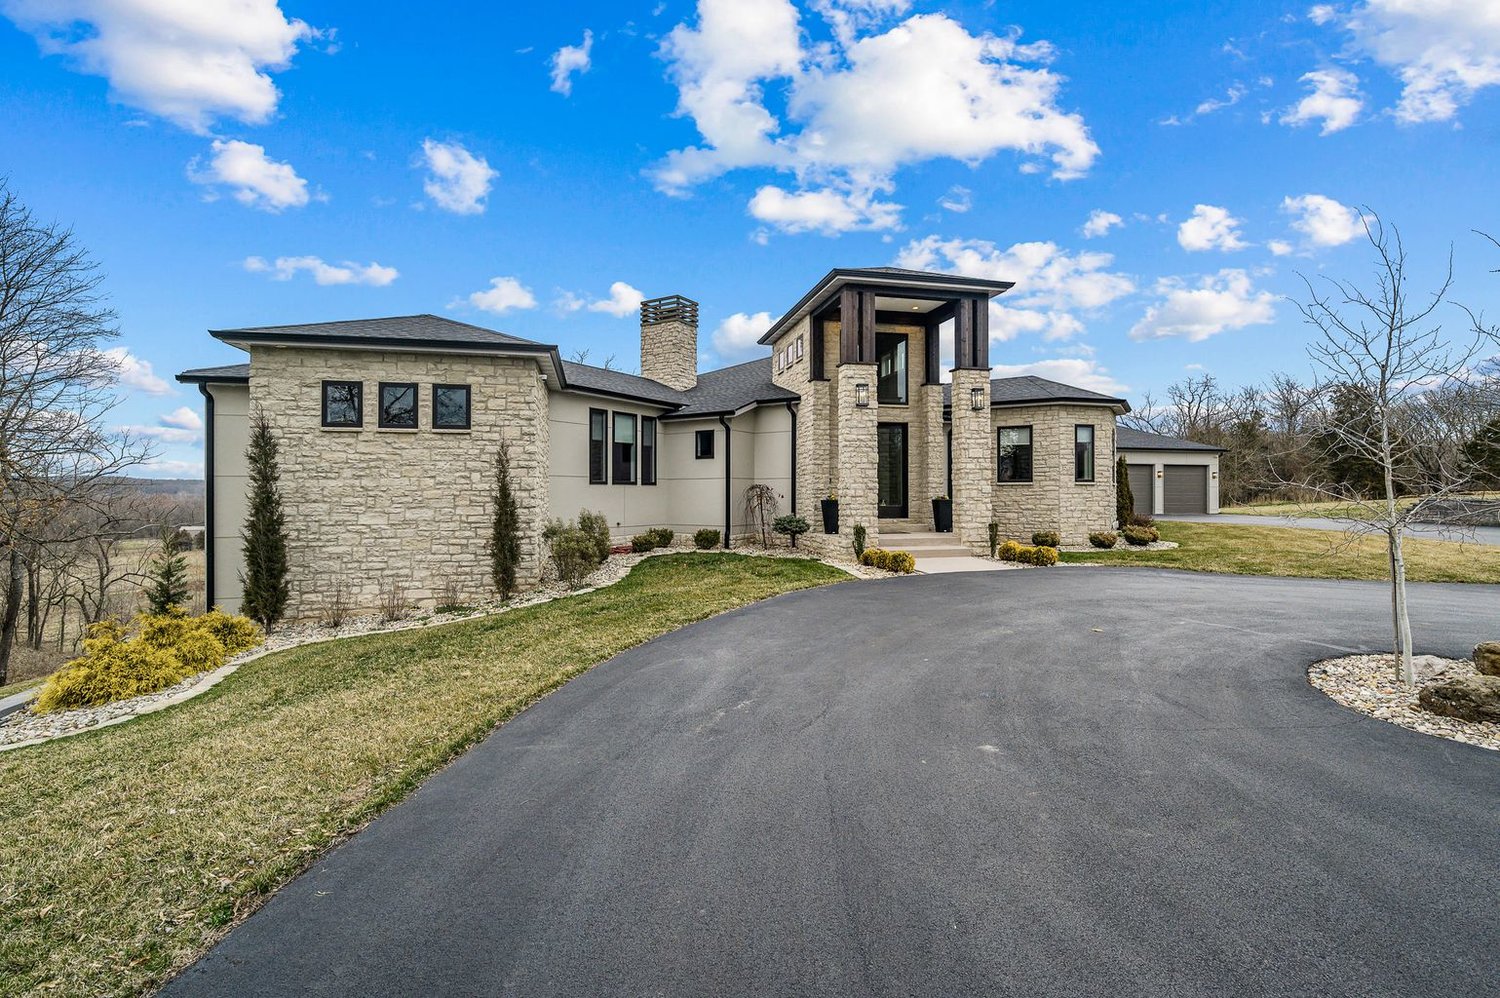 5817 E. Summit View Drive
$2.1 million
Bedrooms: 5
Bathrooms: 6
Listing firm: Indy Wallace Realty LLC